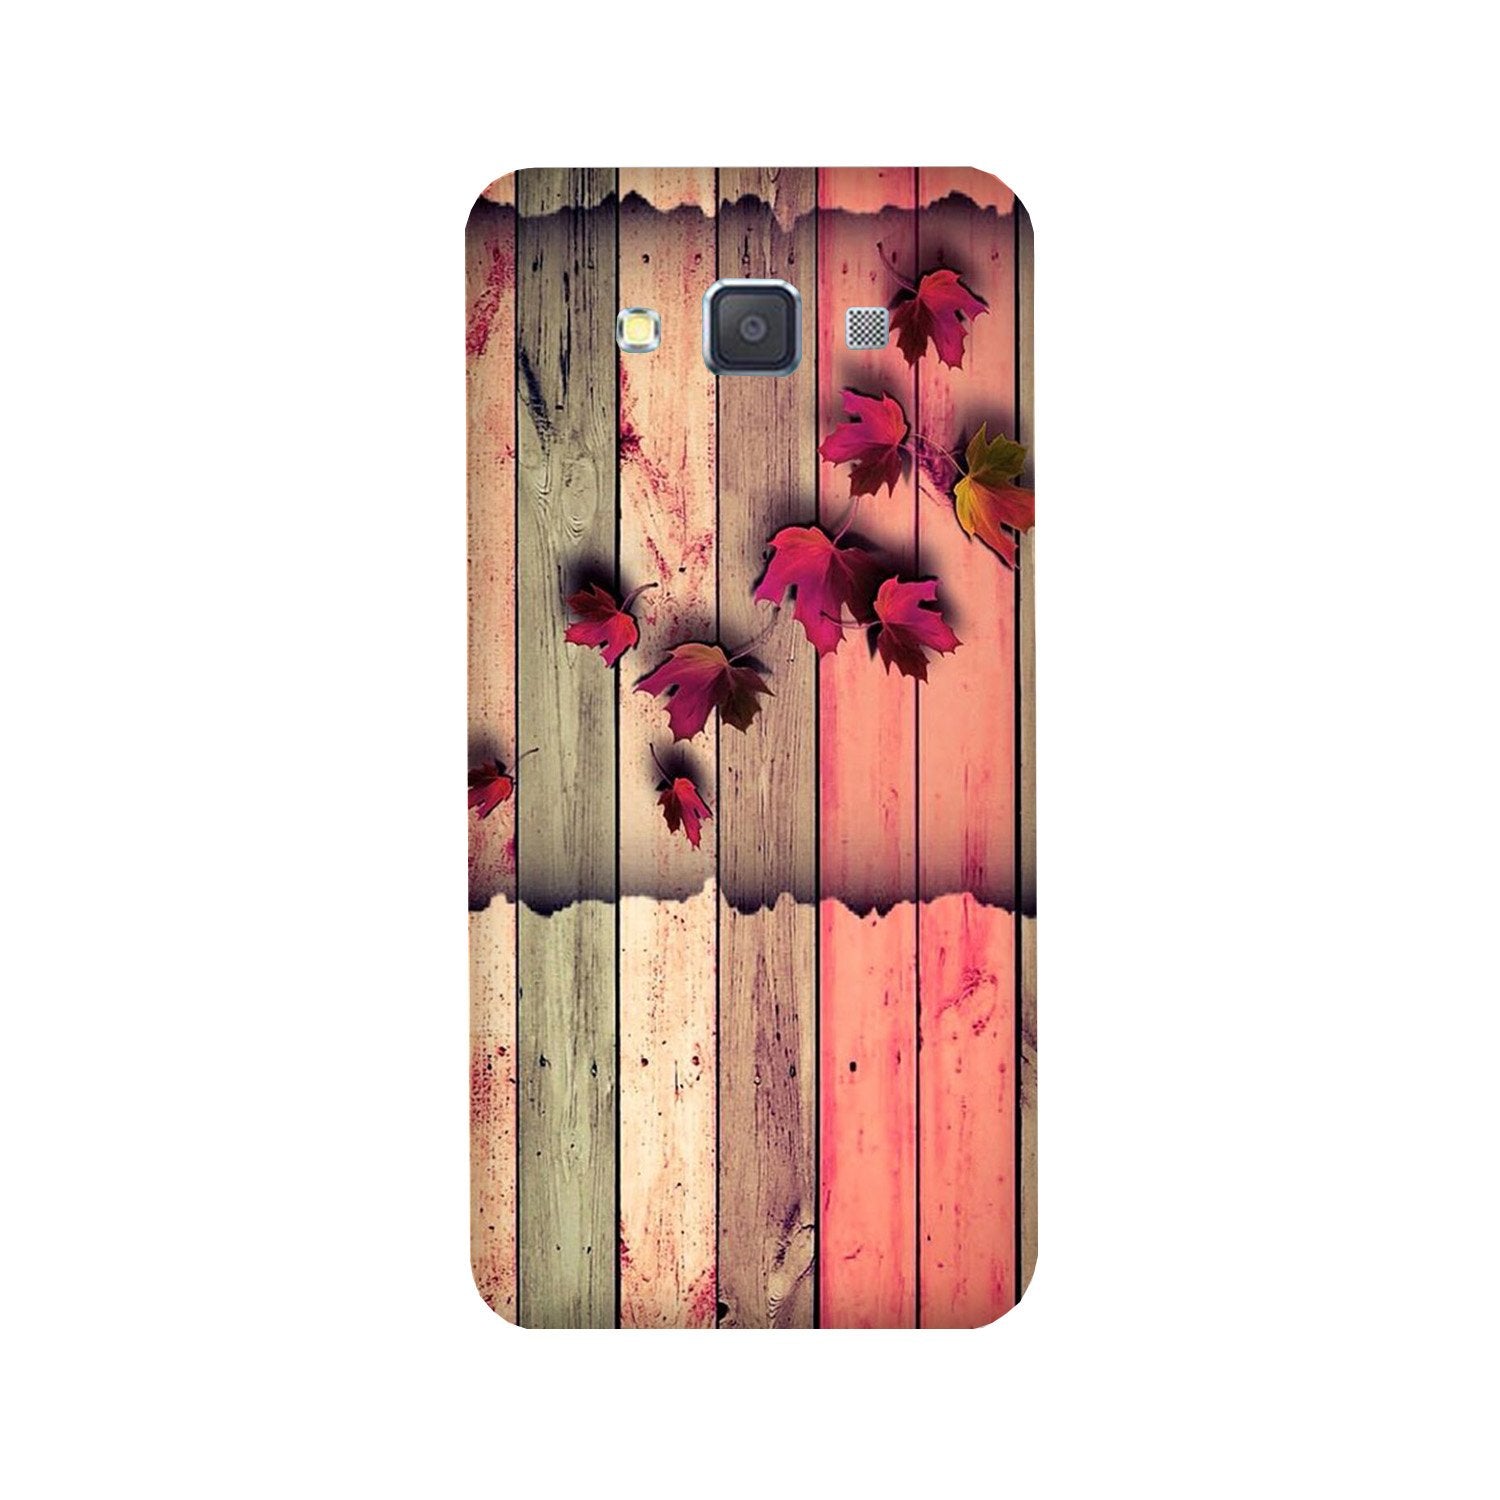 Wooden look2 Case for Galaxy ON7/ON7 Pro